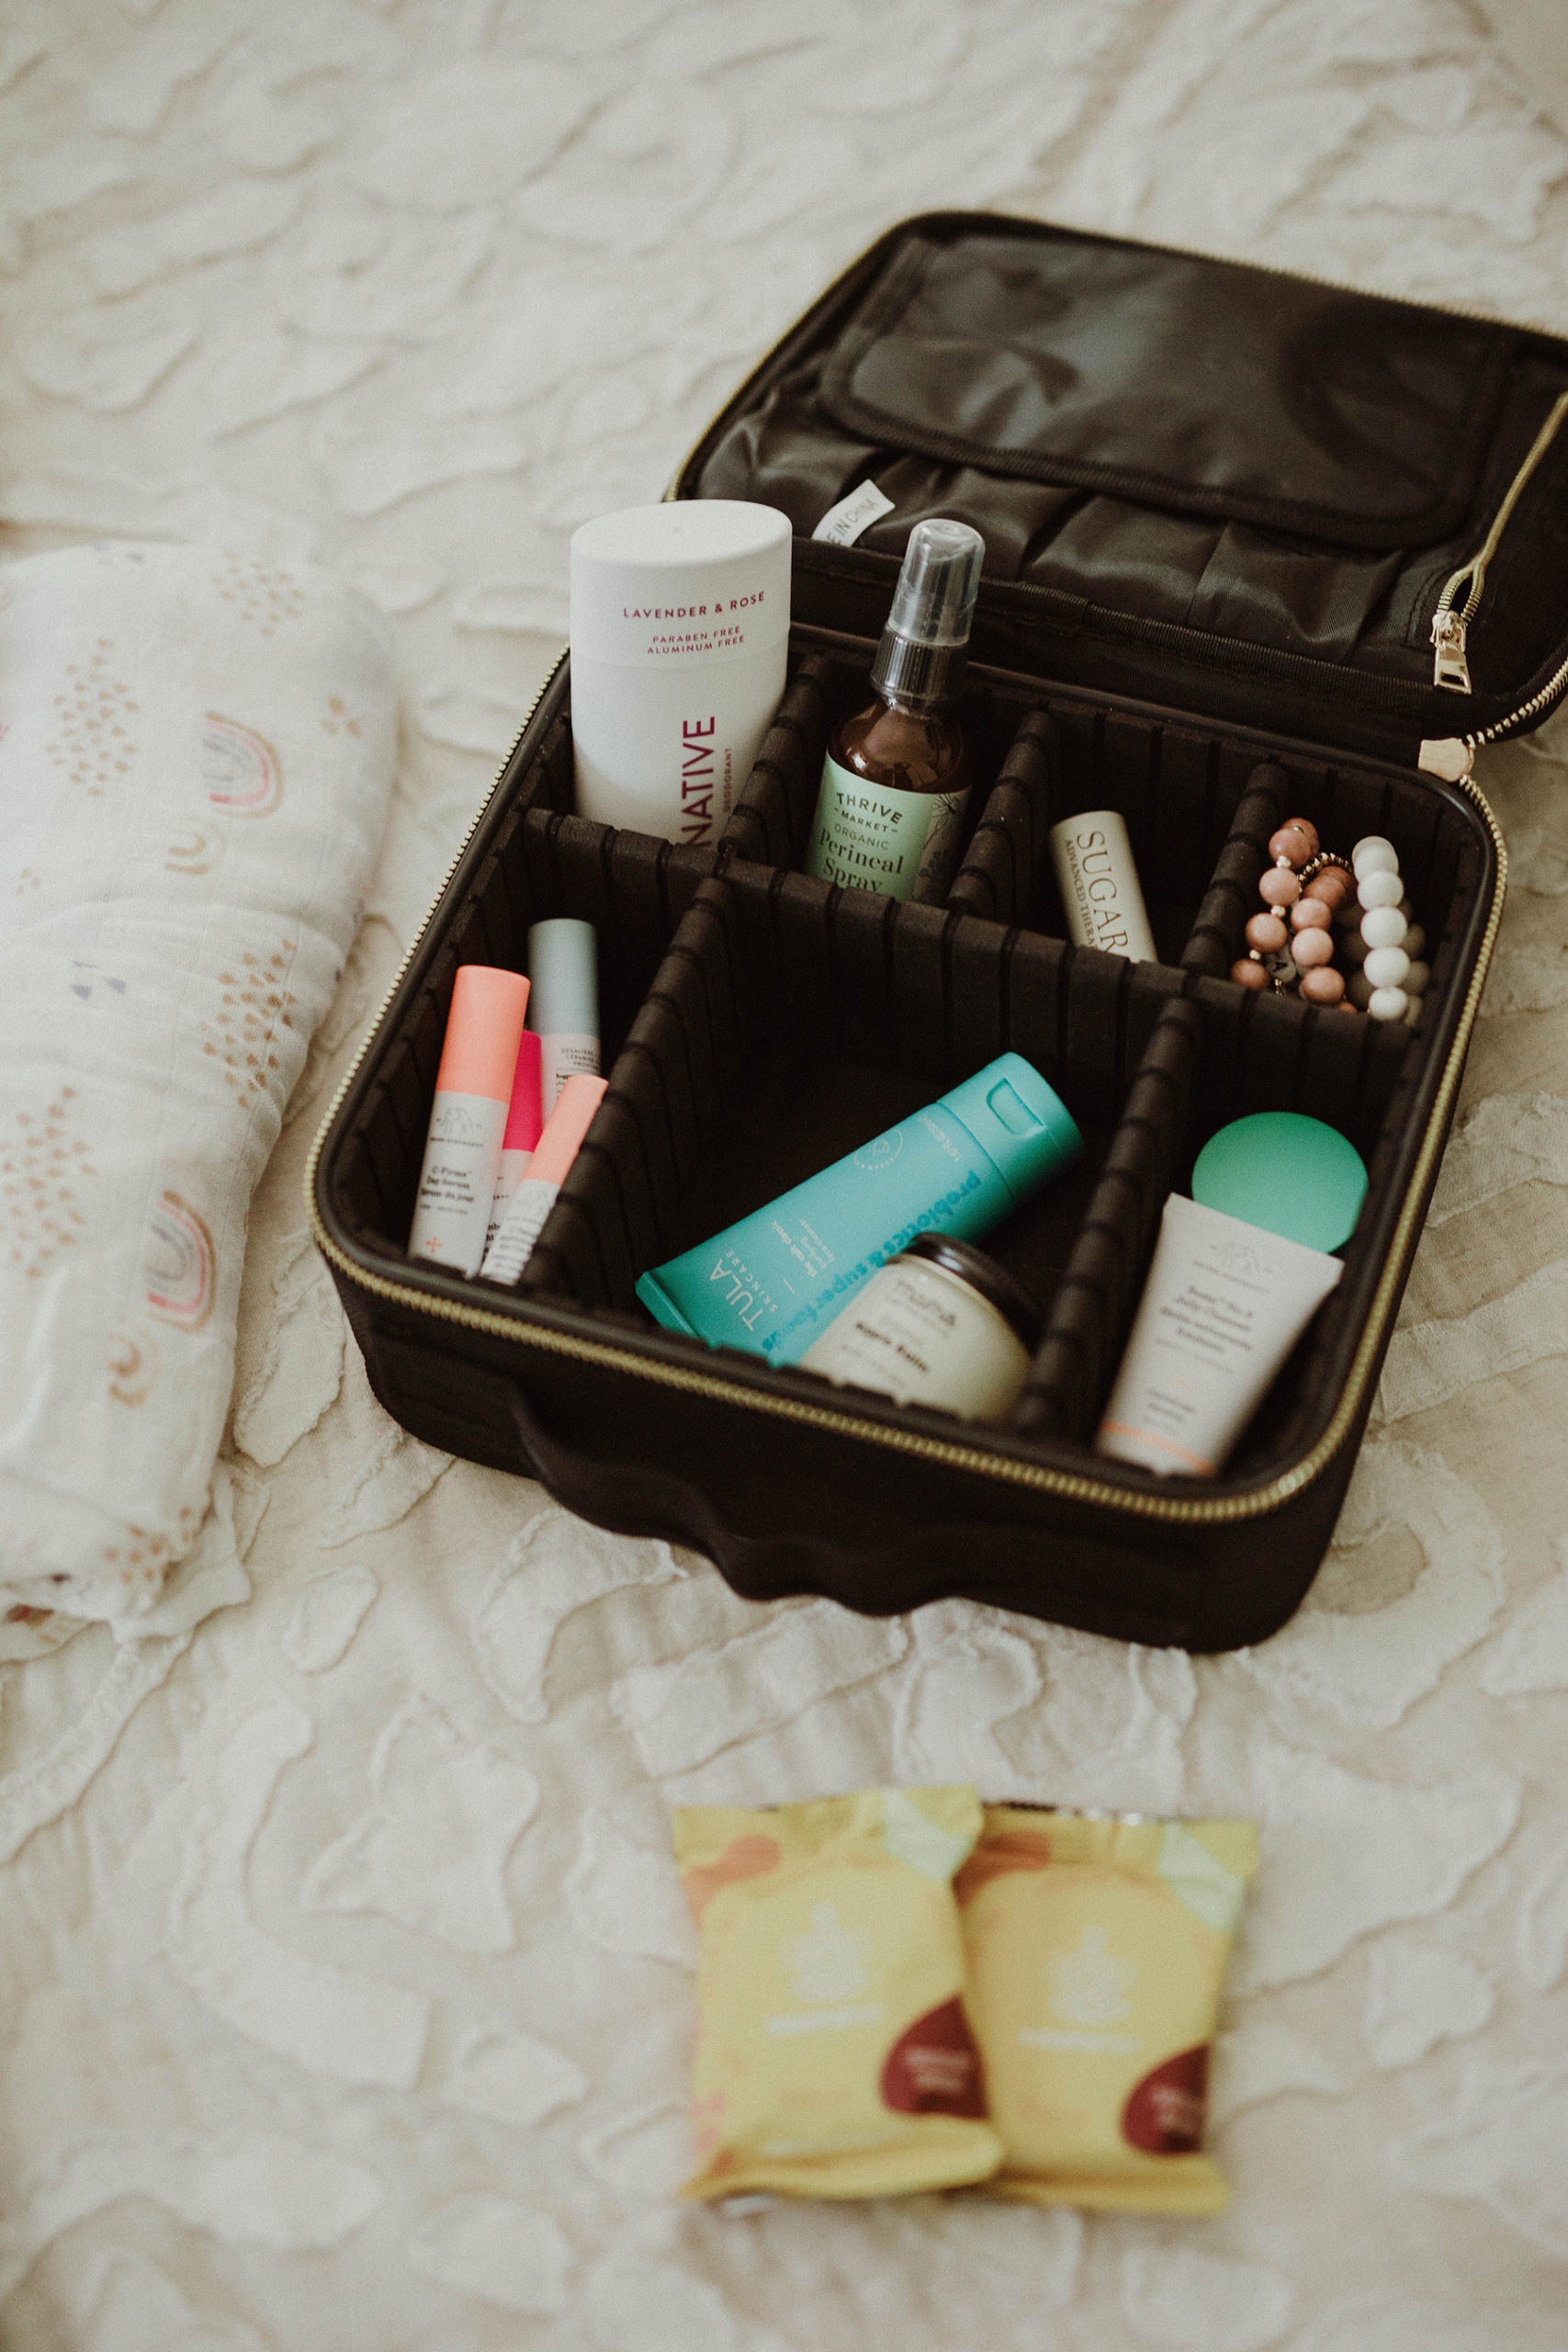 The ultimate checklist - what to pack in your hospital bag – Kit & Kin